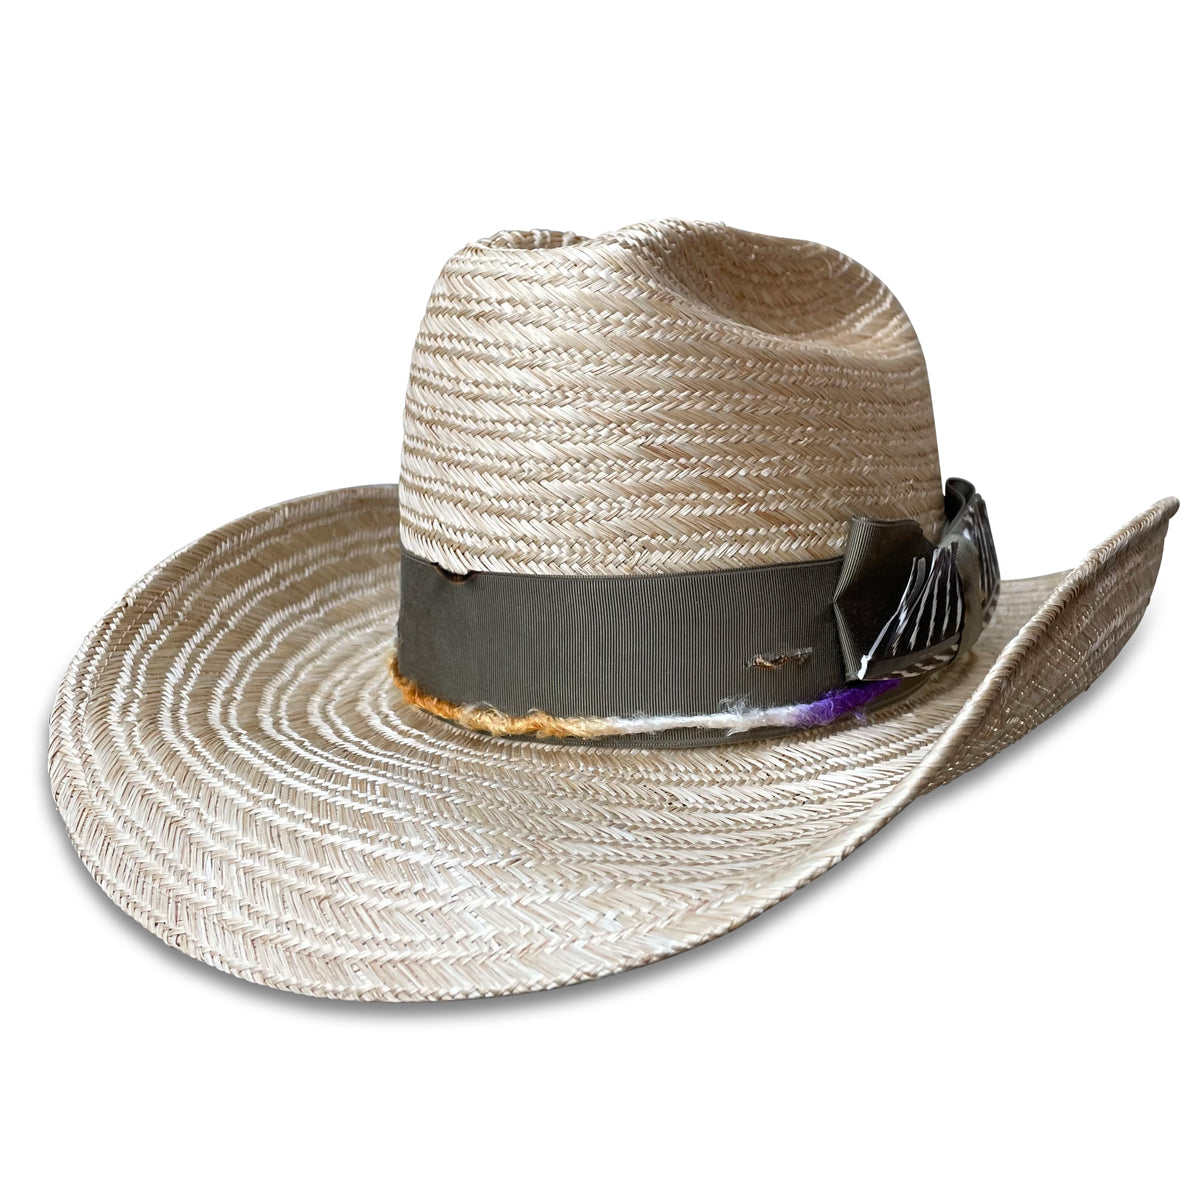 A close-up of a straw cowboy hat, La Chatte, featuring a distressed grosgrain ribbon and colorful, hand-dyed silk yarn accents. A turkey wing feather adds a unique touch to the side of the hat.